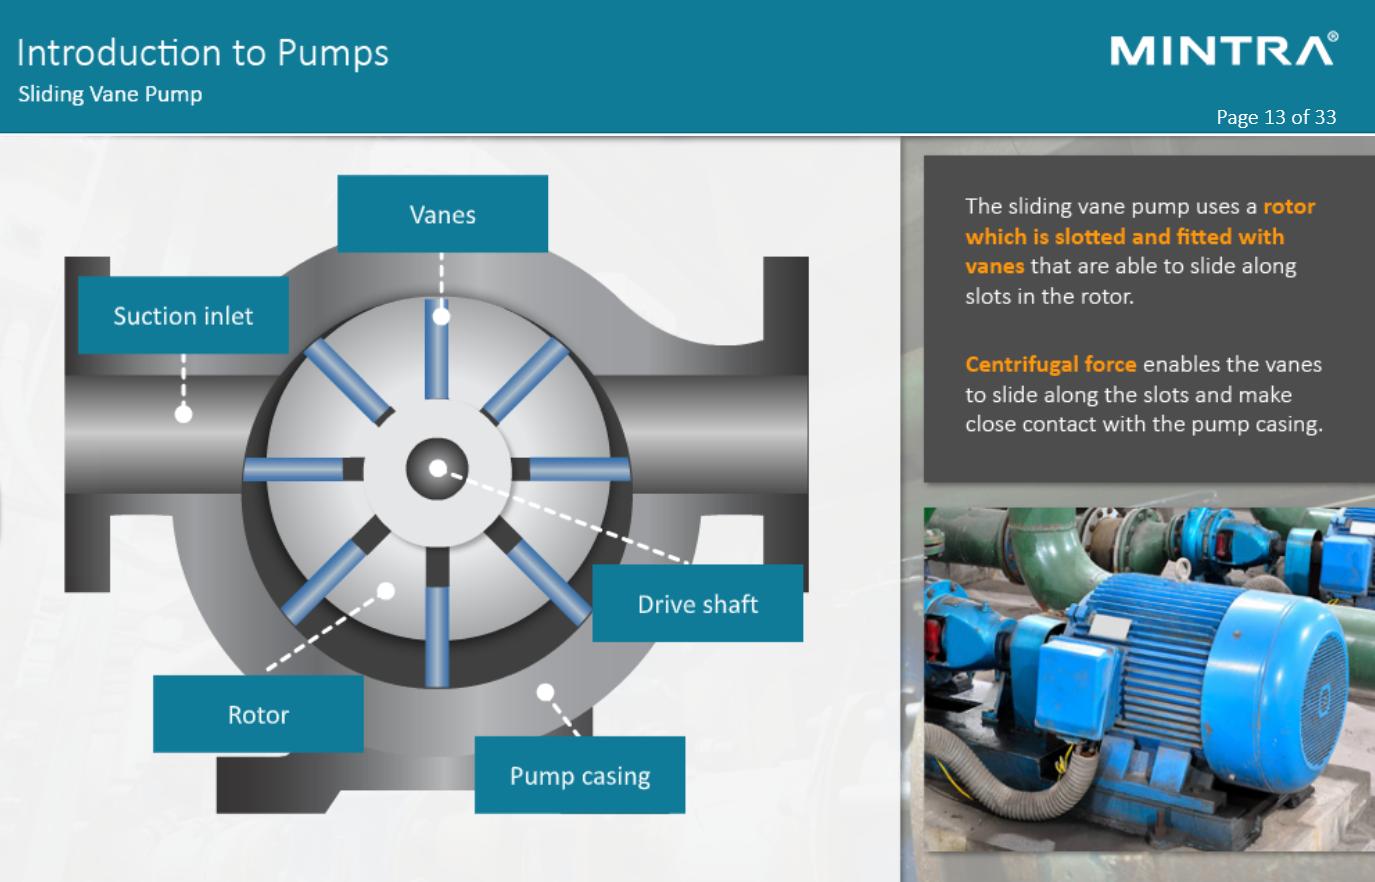 Introduction to Pumps Training